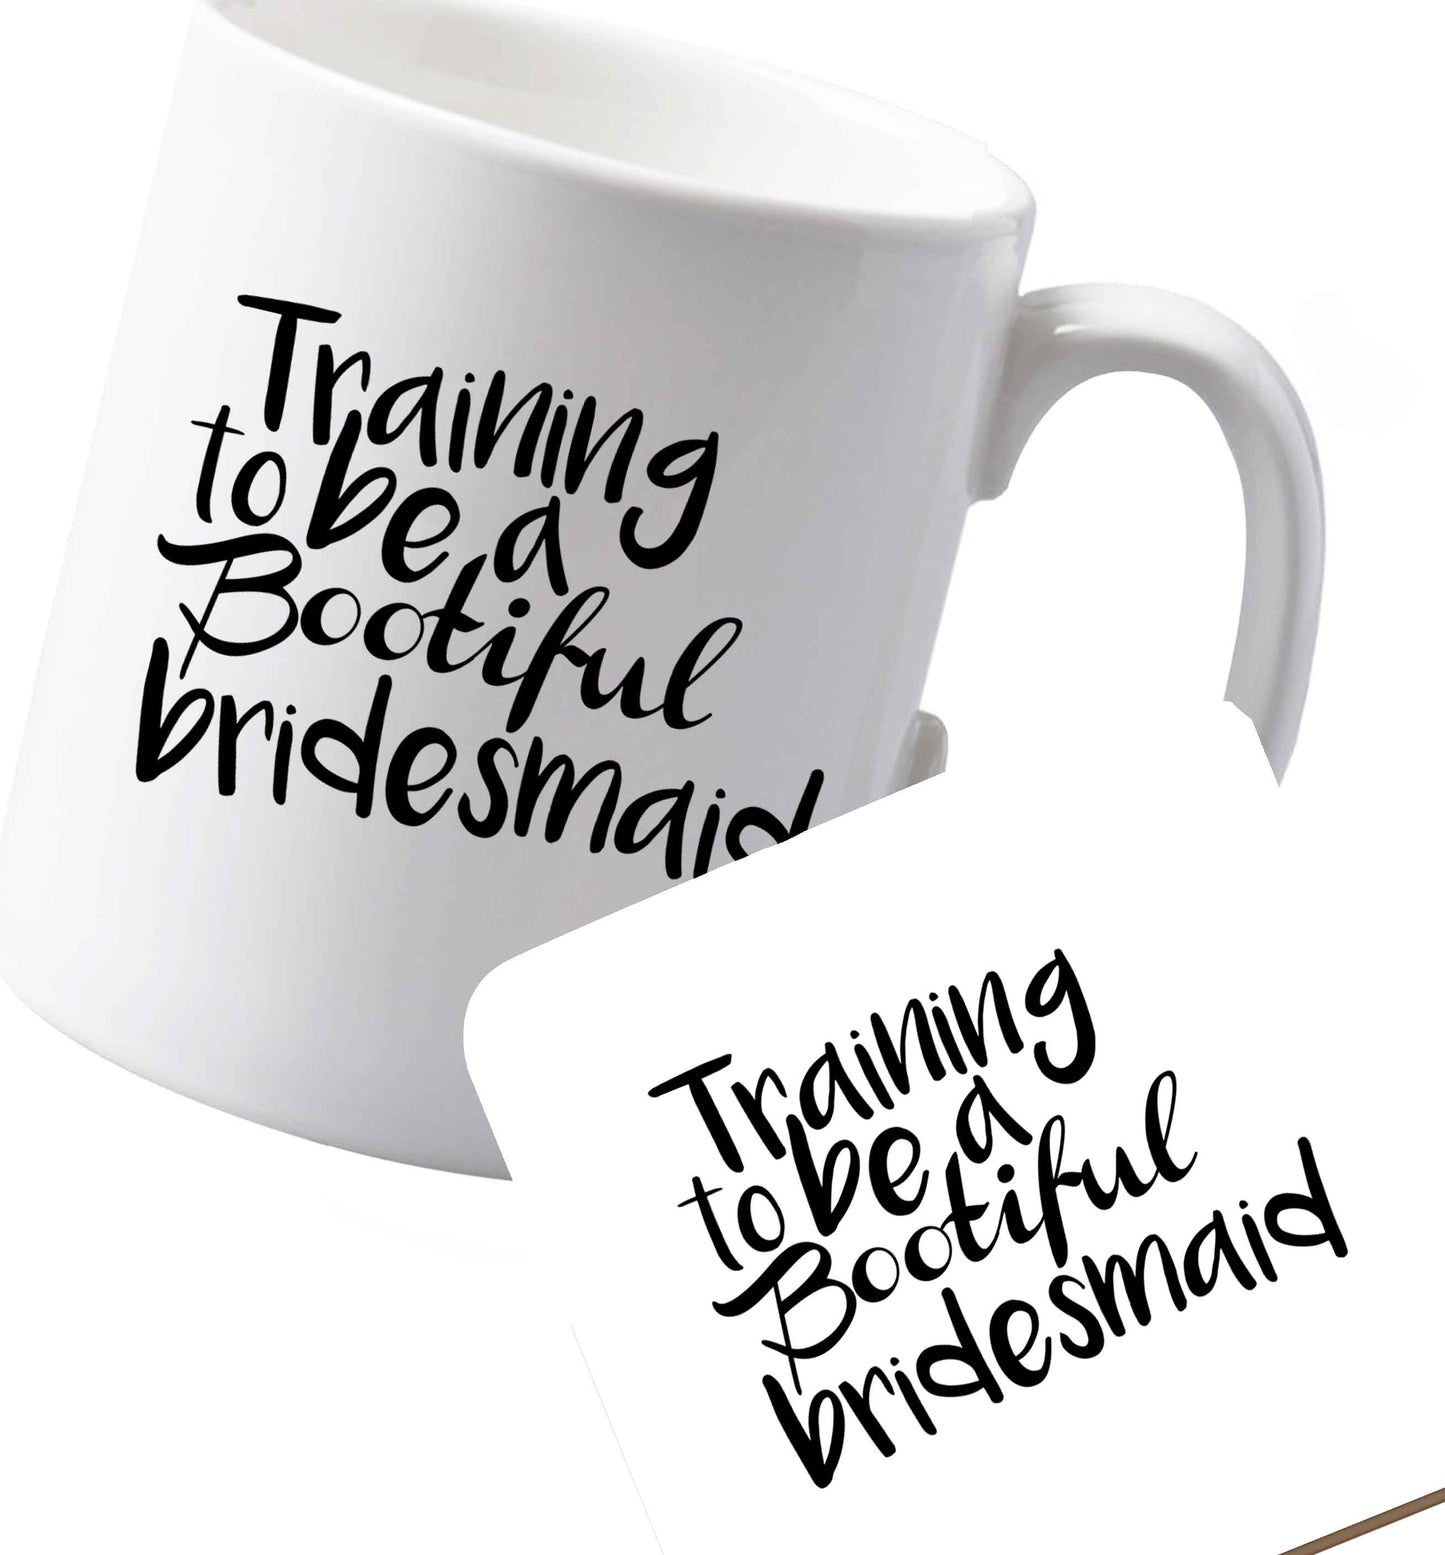 10 oz Ceramic mug and coaster Get motivated and get fit for your big day! Our workout quotes and designs will get you ready to sweat! Perfect for any bride, groom or bridesmaid to be!    both sides